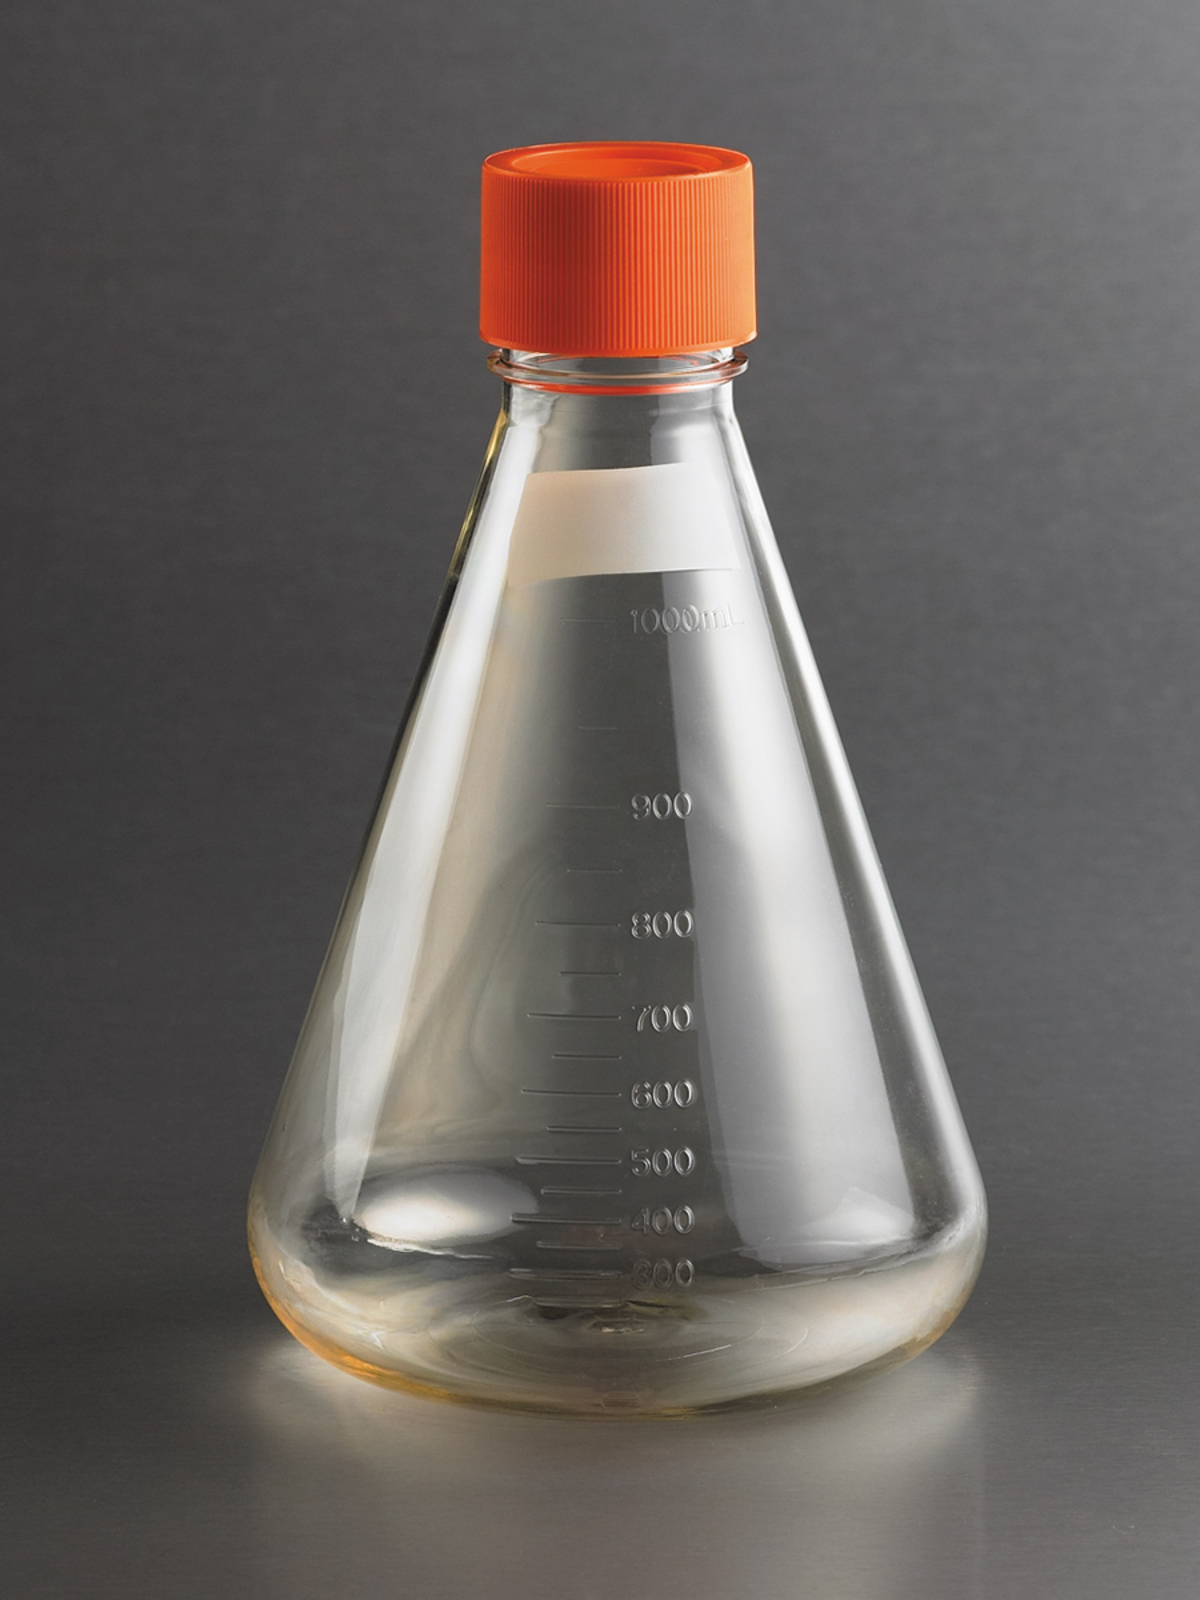 https://www.corning.com/catalog/cls/products/e/erlenmeyerShakerFlasks/431146/images/431146-PDP_A.jpg/_jcr_content/renditions/product.zoom.1200.jpg